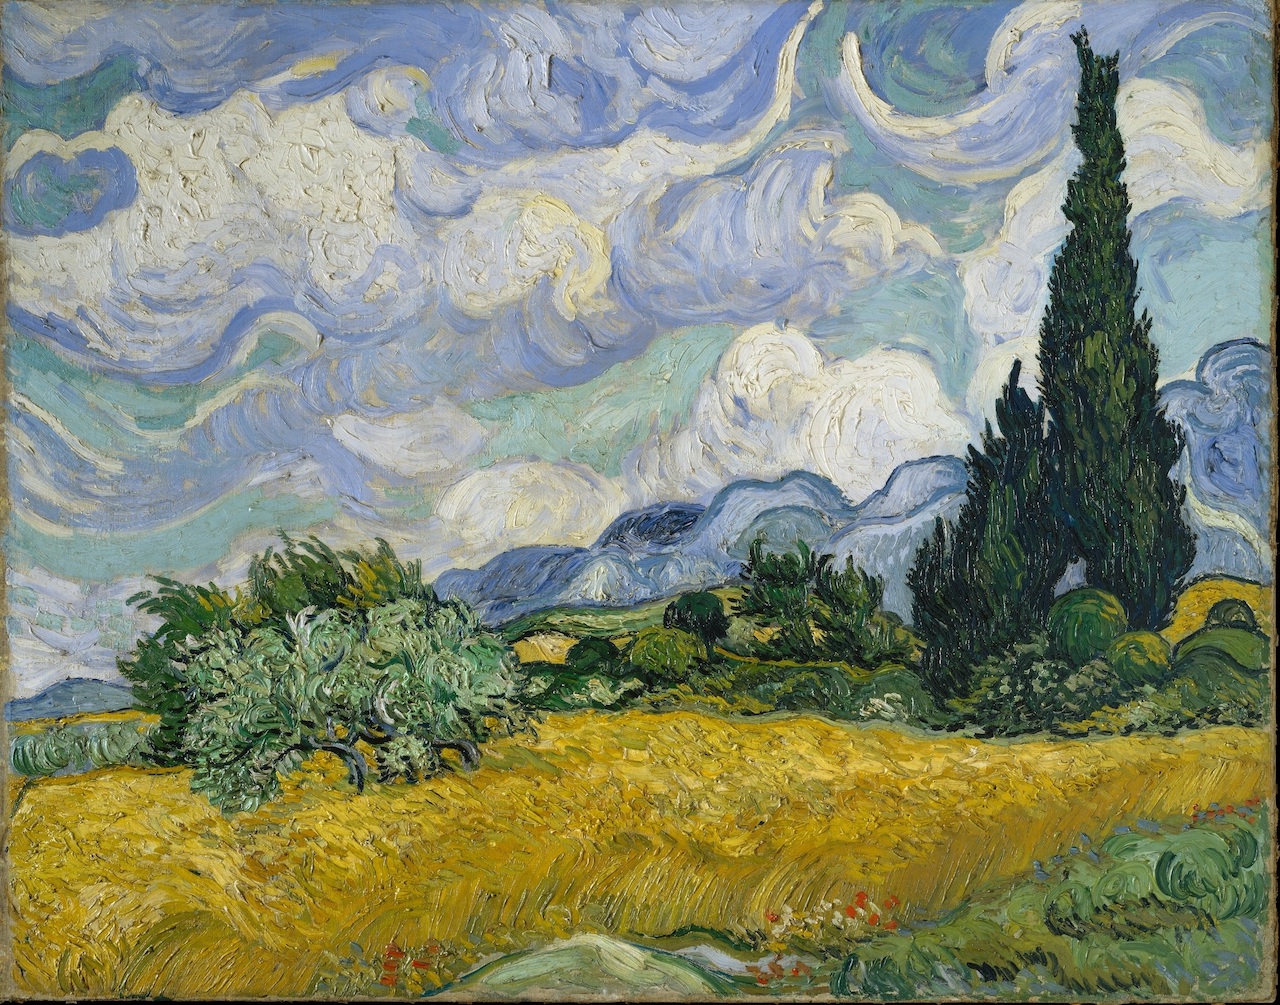 Van Gogh: A Wheatfield with Cypresses, June 1889